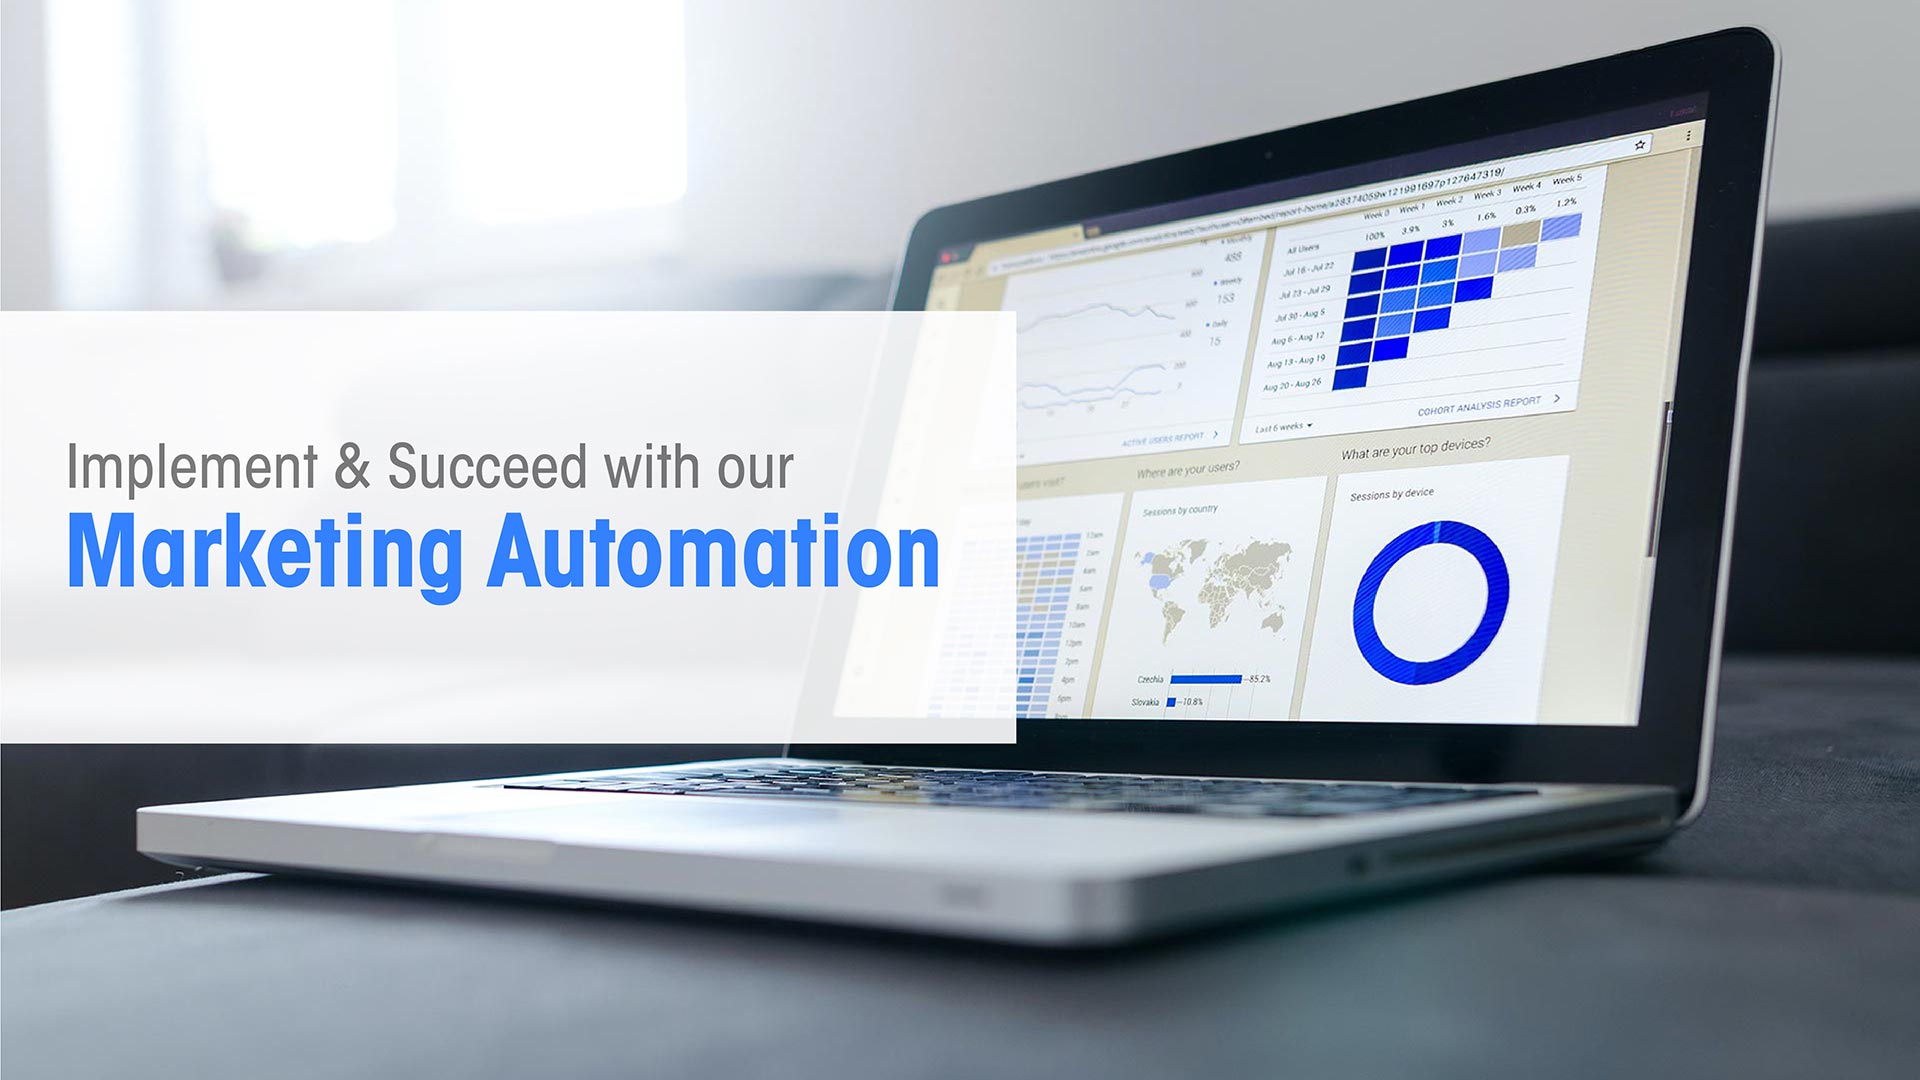 5 Marketing Automation Services I wish I would have Implemented them on my business sooner